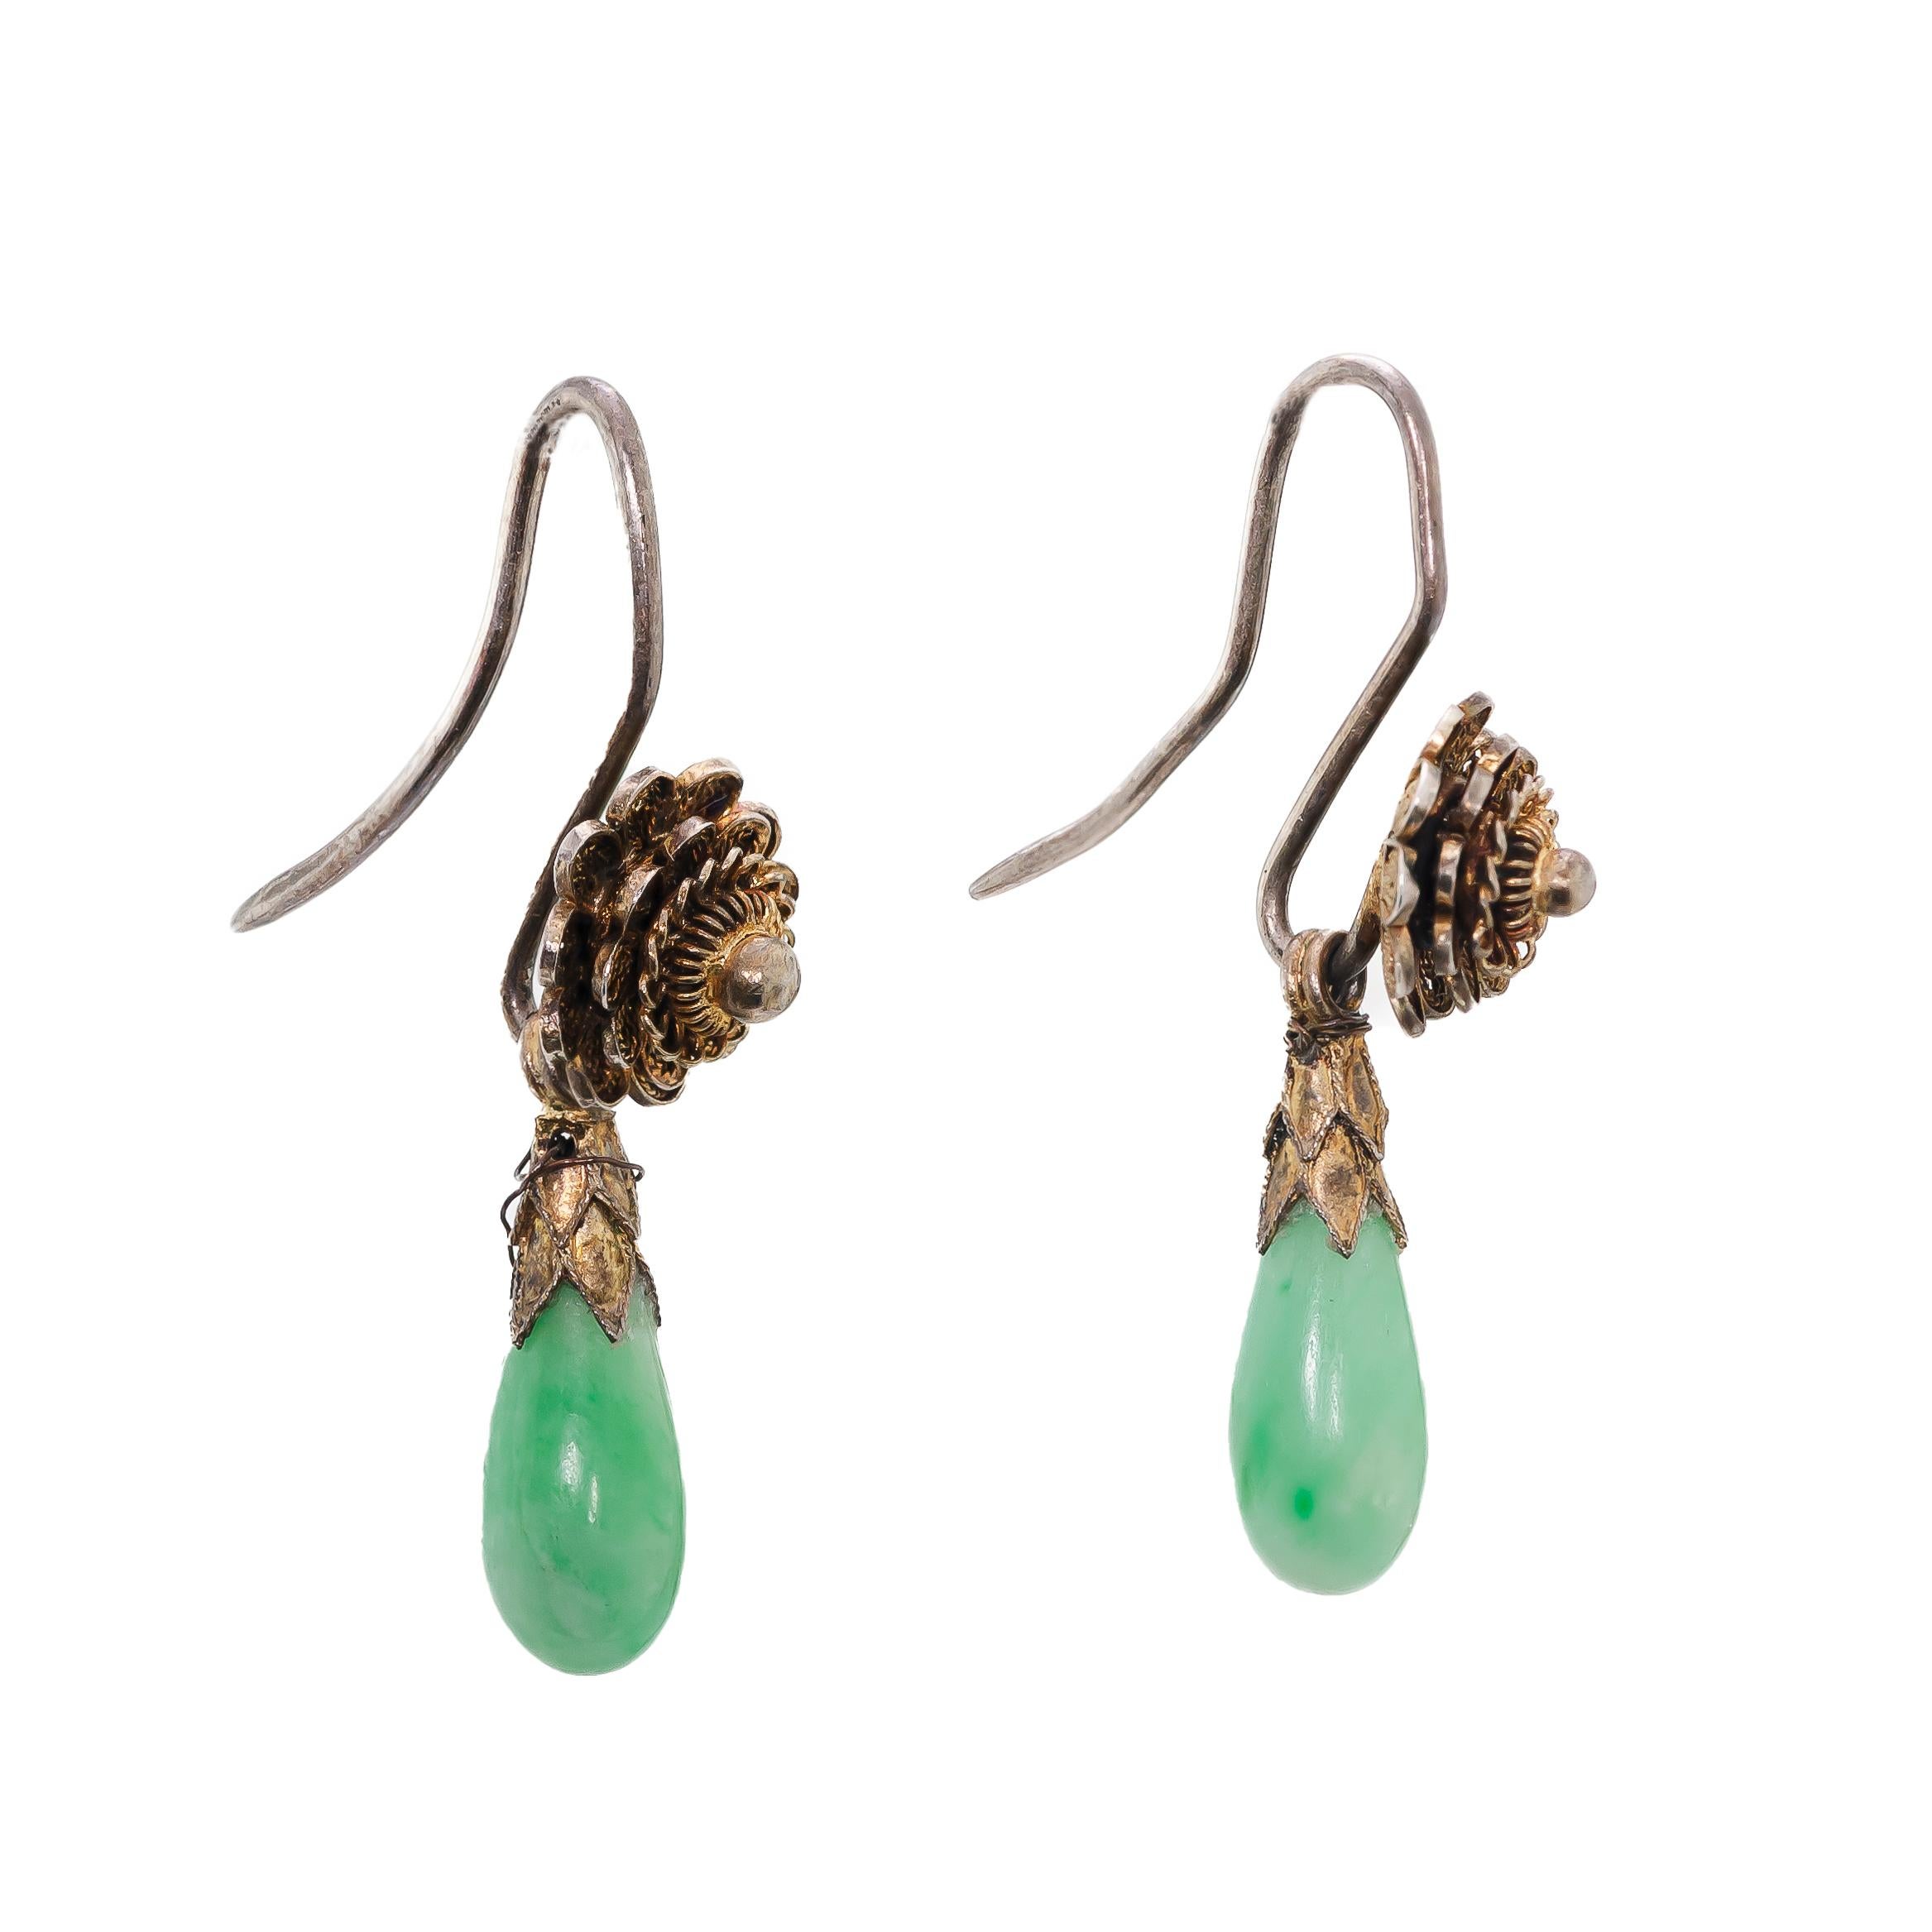 Lovely vintage jade and silver gilt earrings containing two (2) jade drops measuring approximately 10.5 mm in length set from silver gilt flower and shepherd's hook gilt mount.